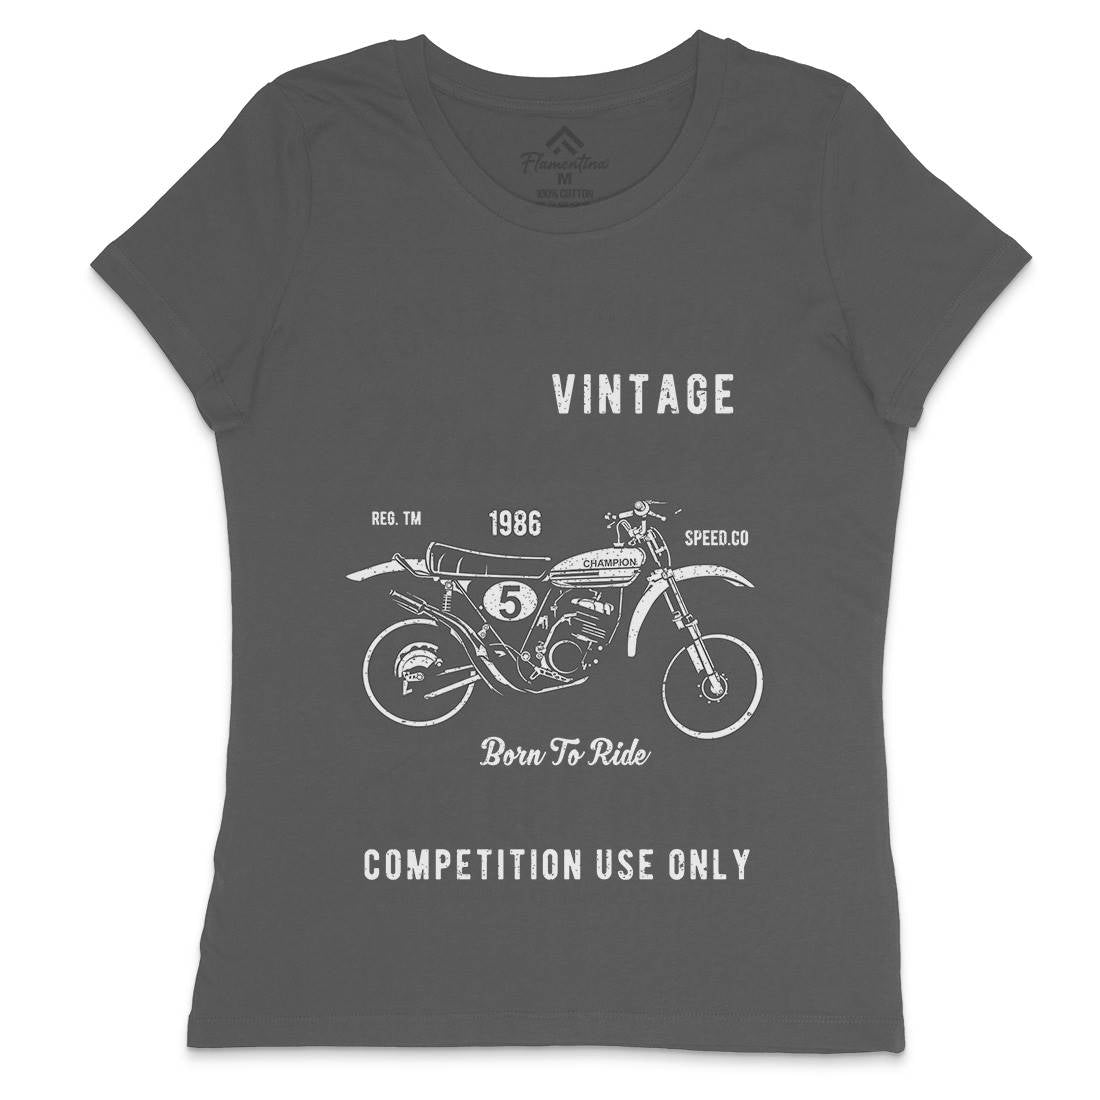 Vintage Motocross Womens Crew Neck T-Shirt Motorcycles A785